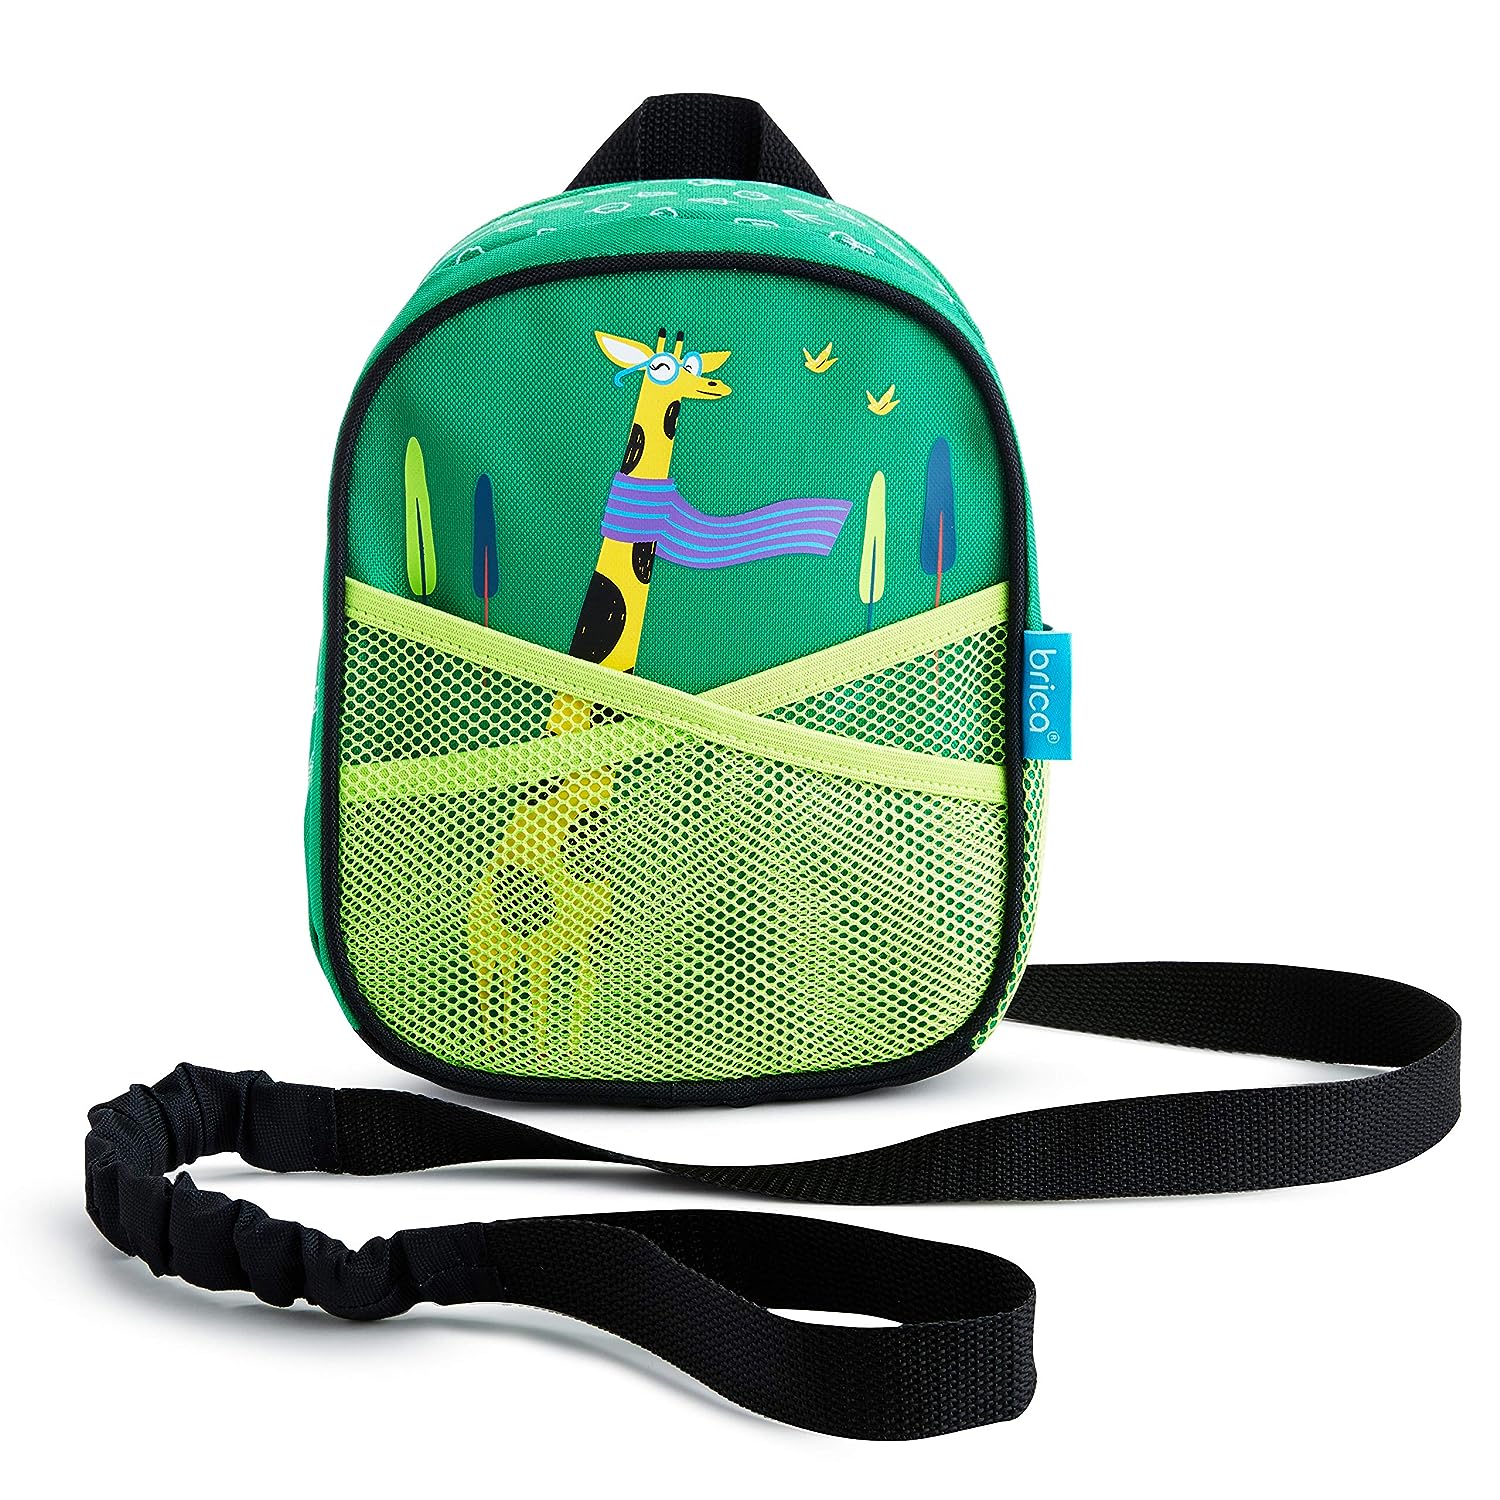 Safety Harness Backpack, by Munchkin